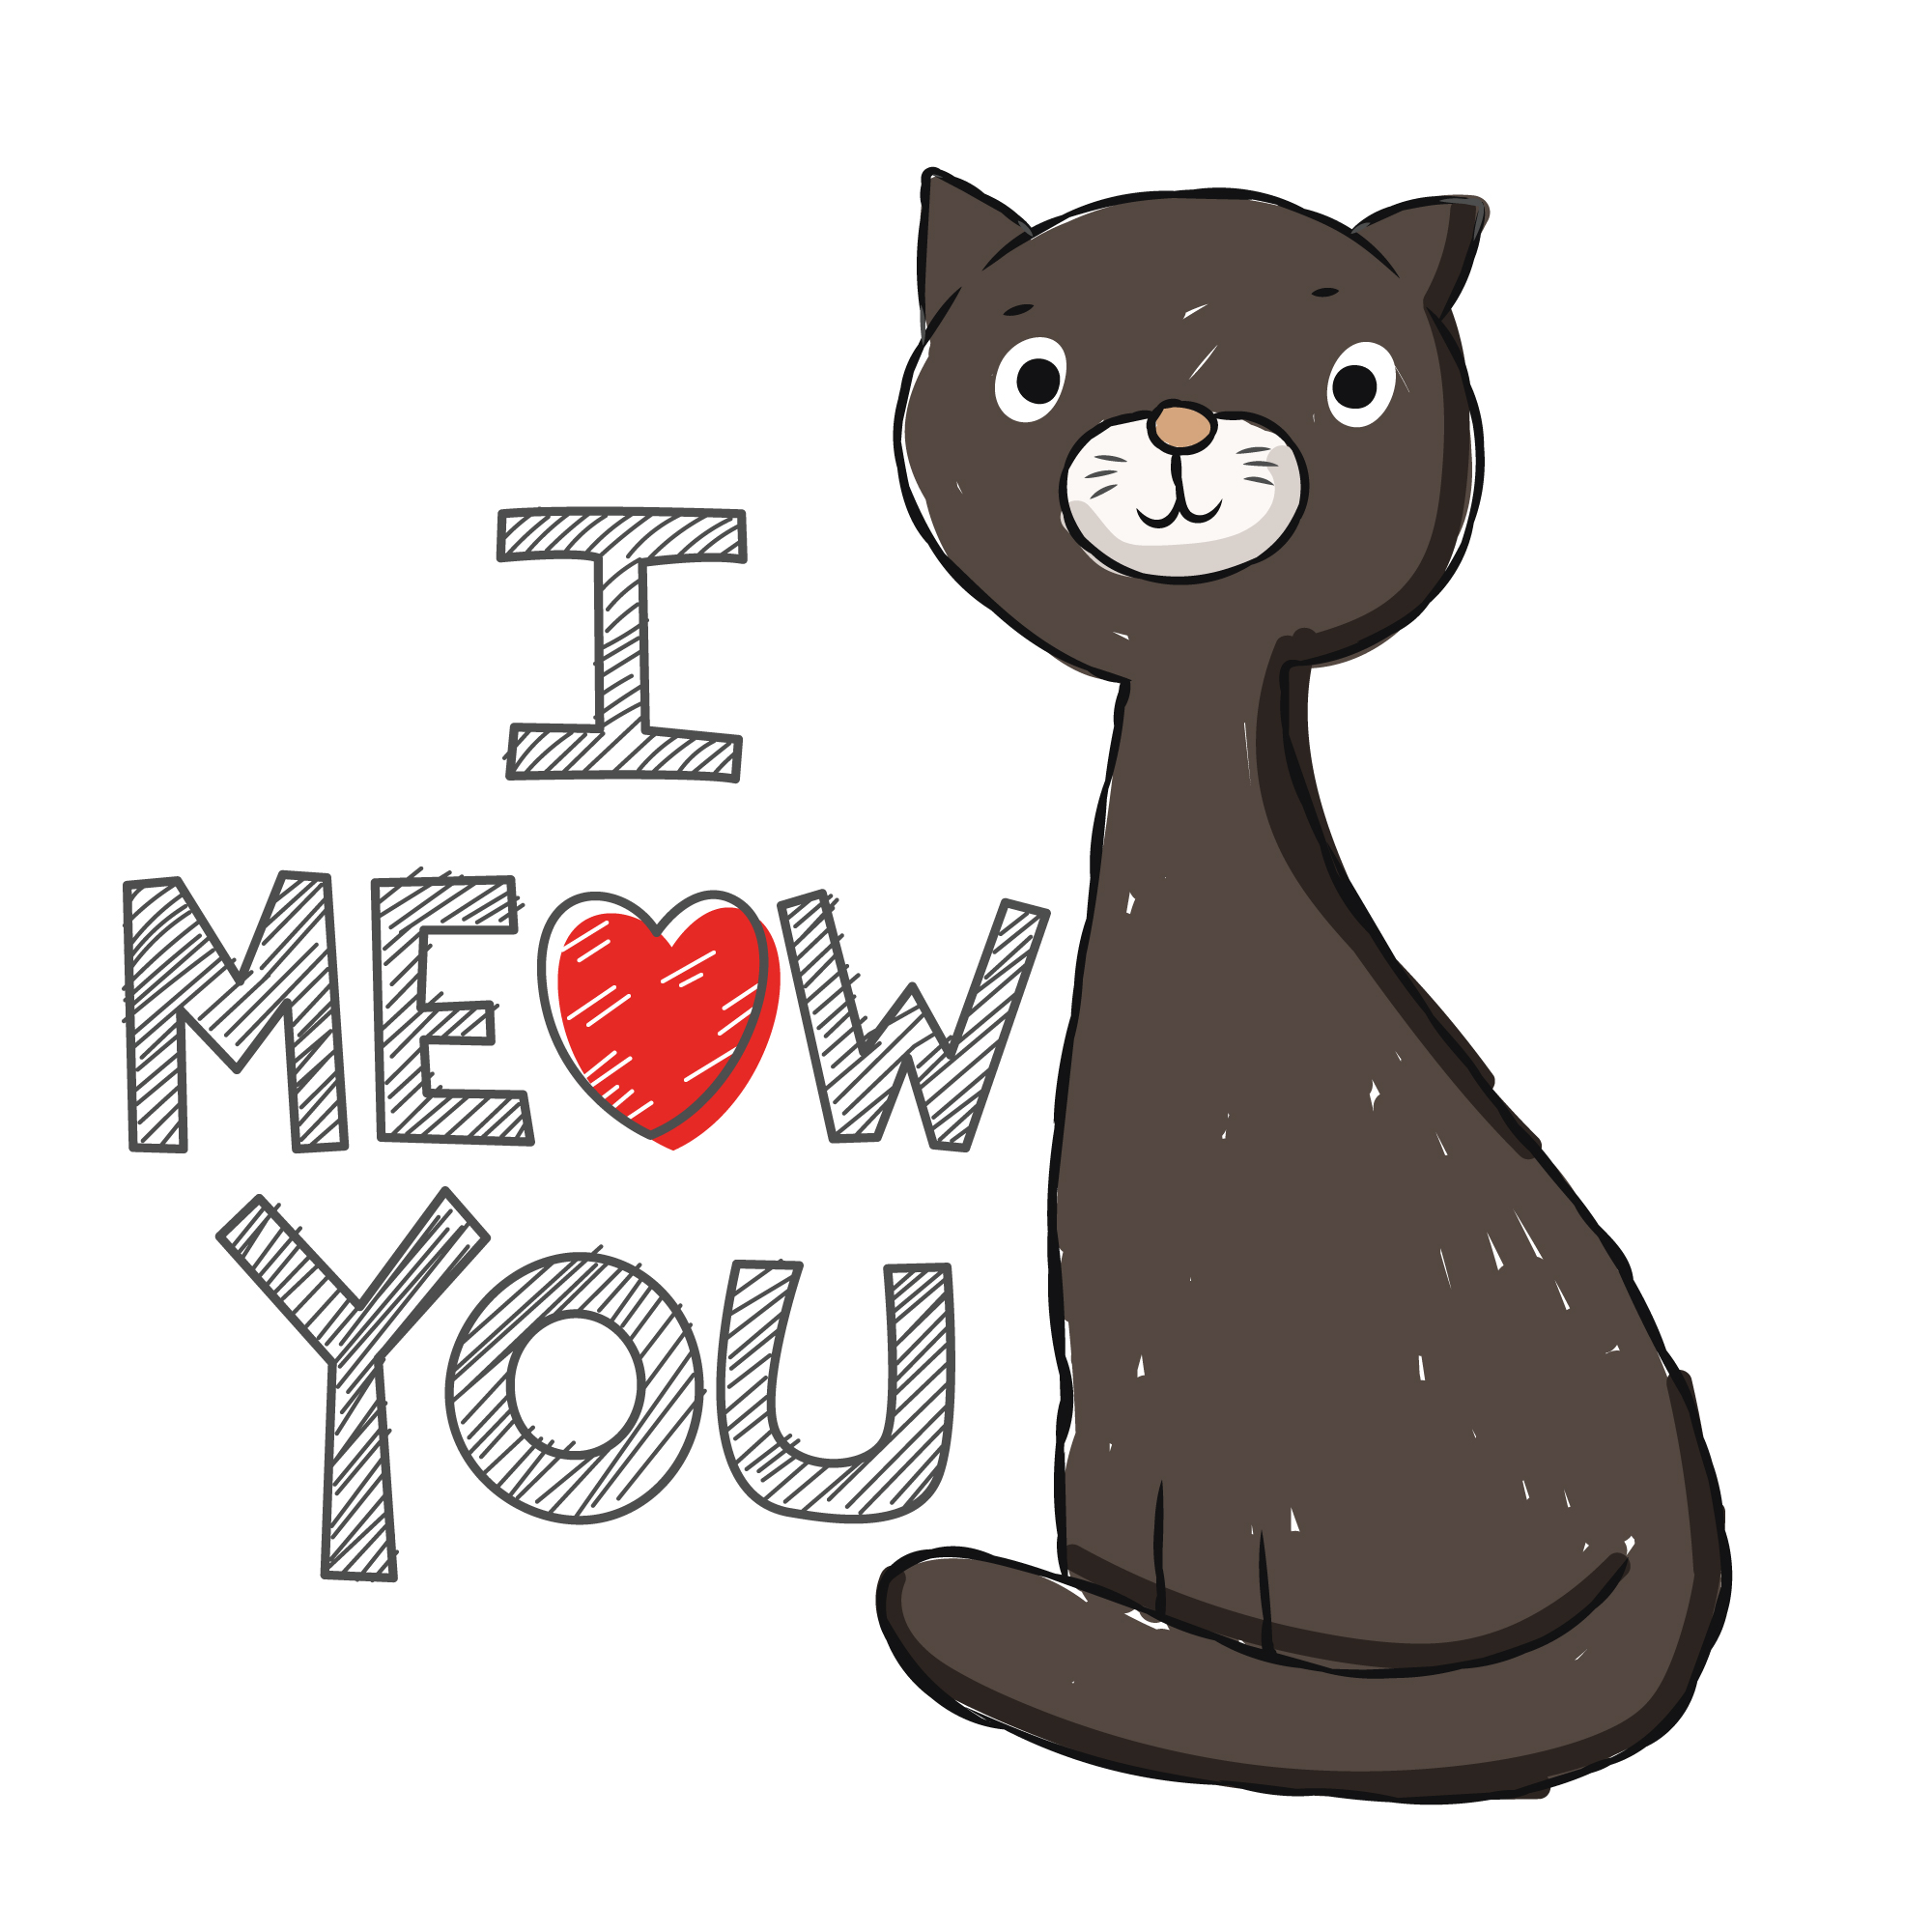 I Meow You Cat Download Free Vectors Clipart Graphics Vector Art,Homemade Chinchilla Toys